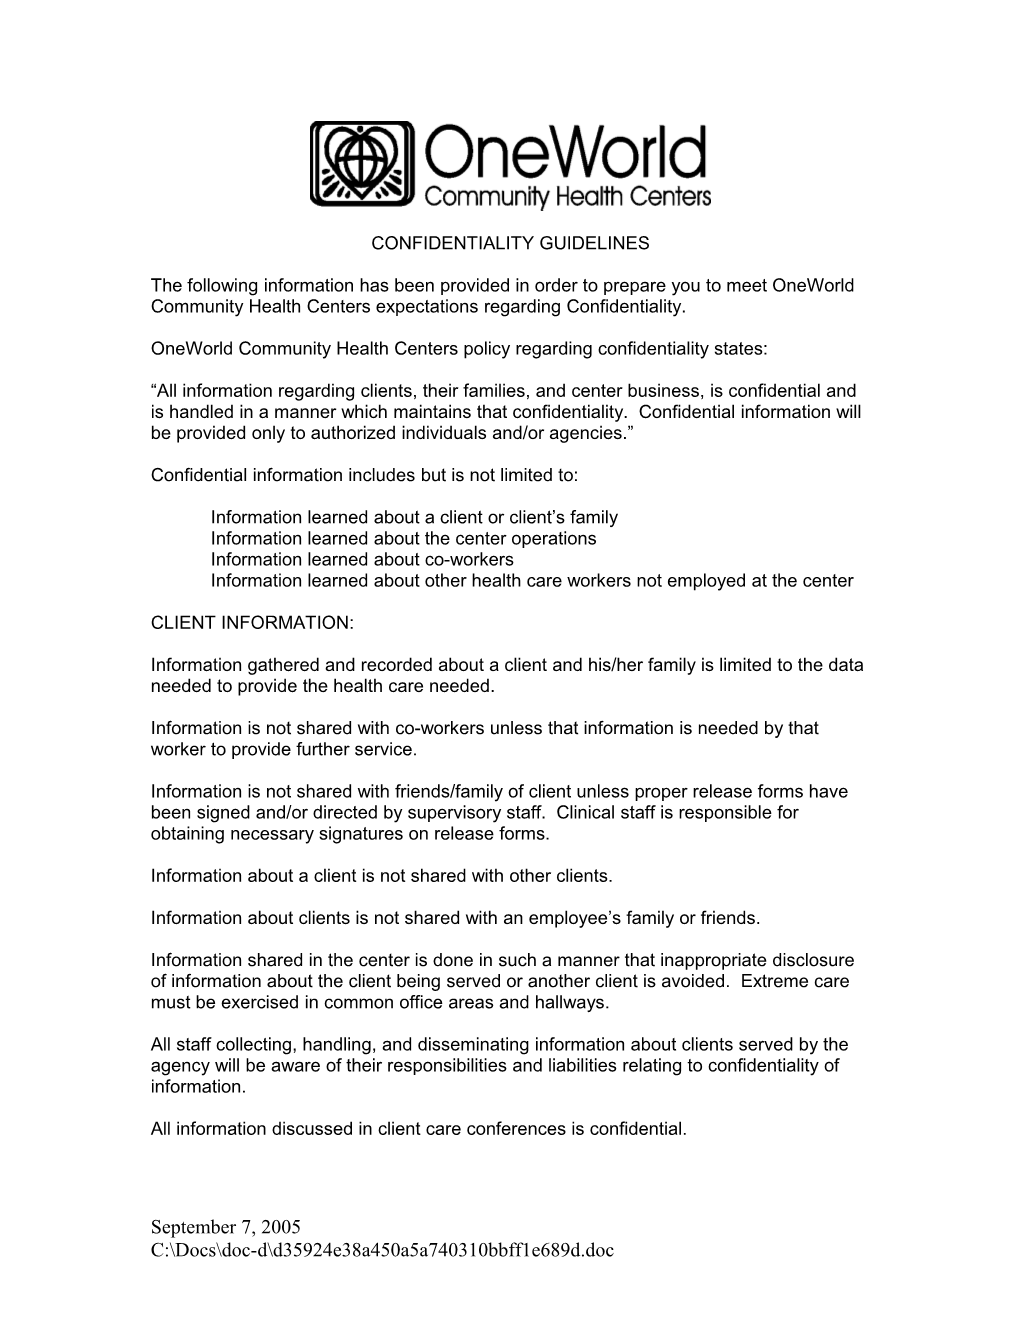 Oneworld Community Health Centers Policy Regarding Confidentiality States